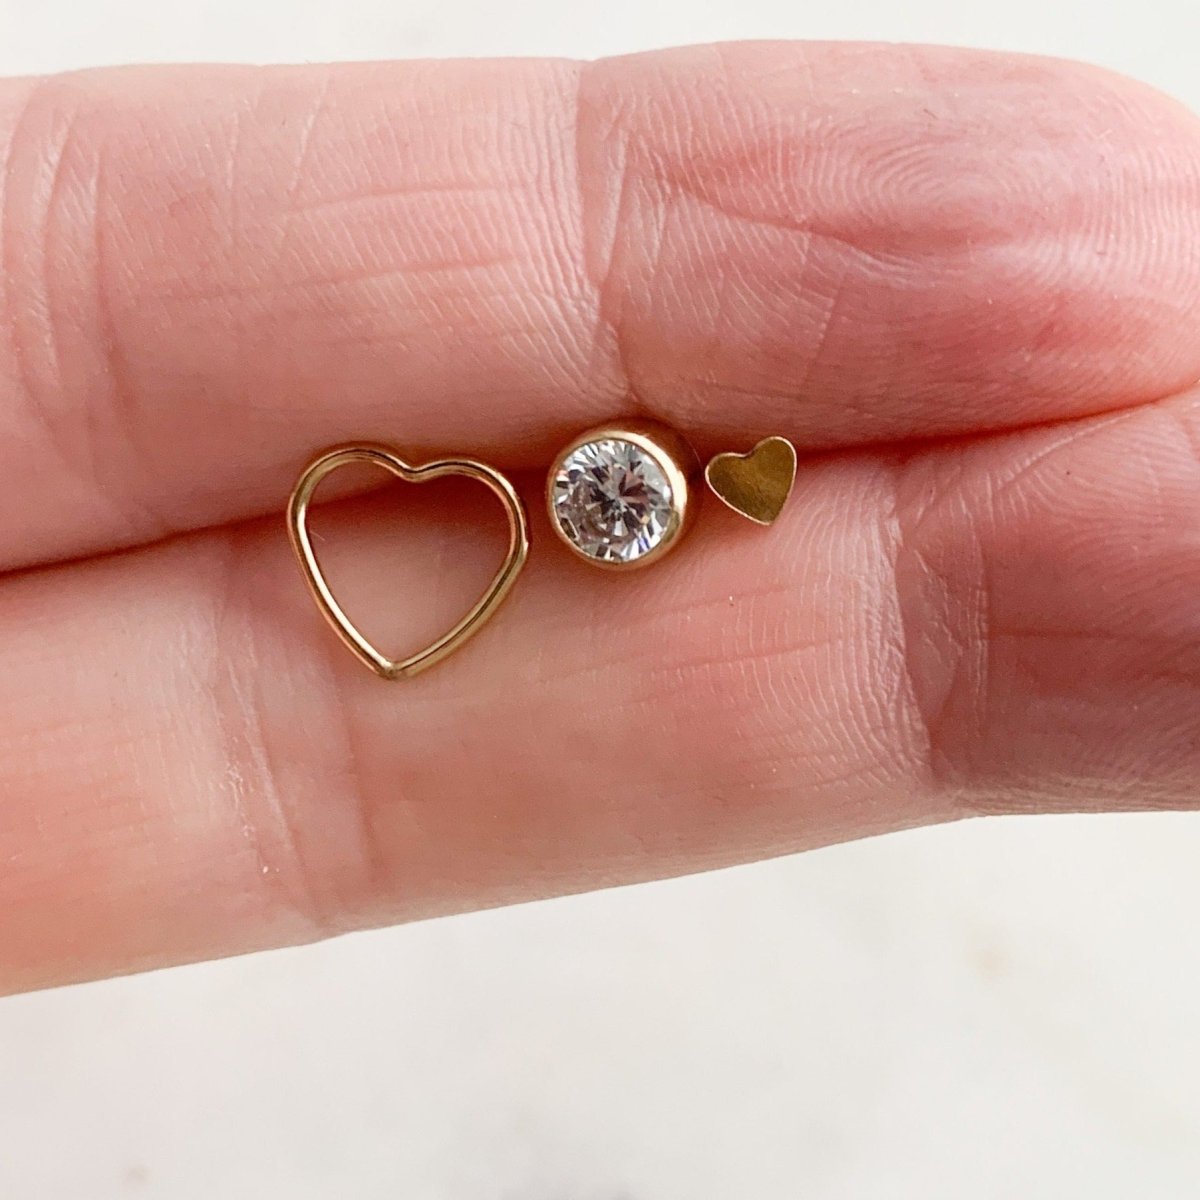 Gold Heart Stud Earrings Set - Adorned by Ruth